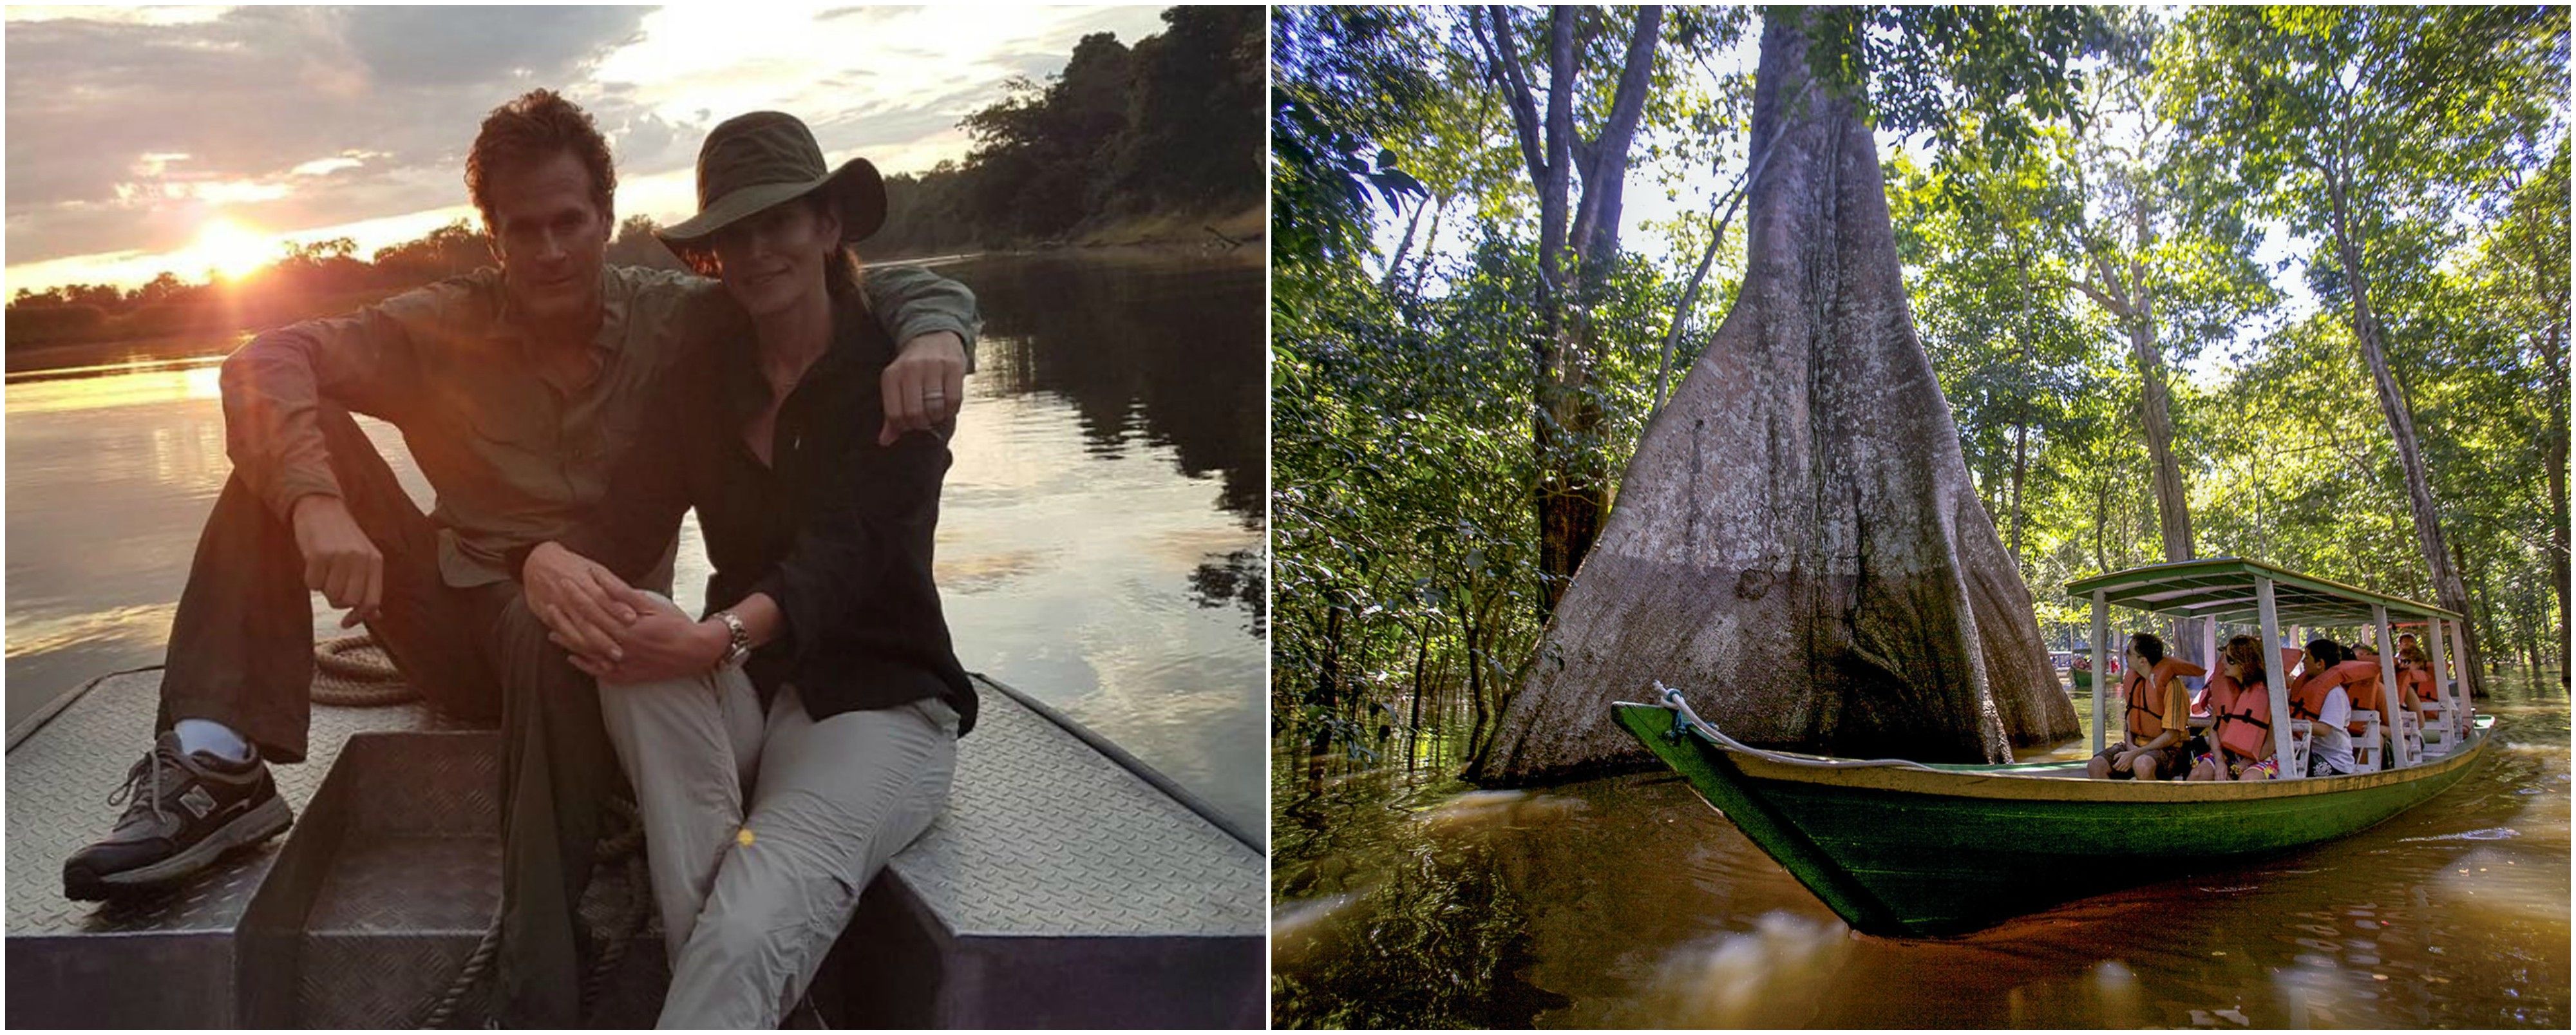 Cindy Crawford and Rande Gerber on river cruise on the Amazon